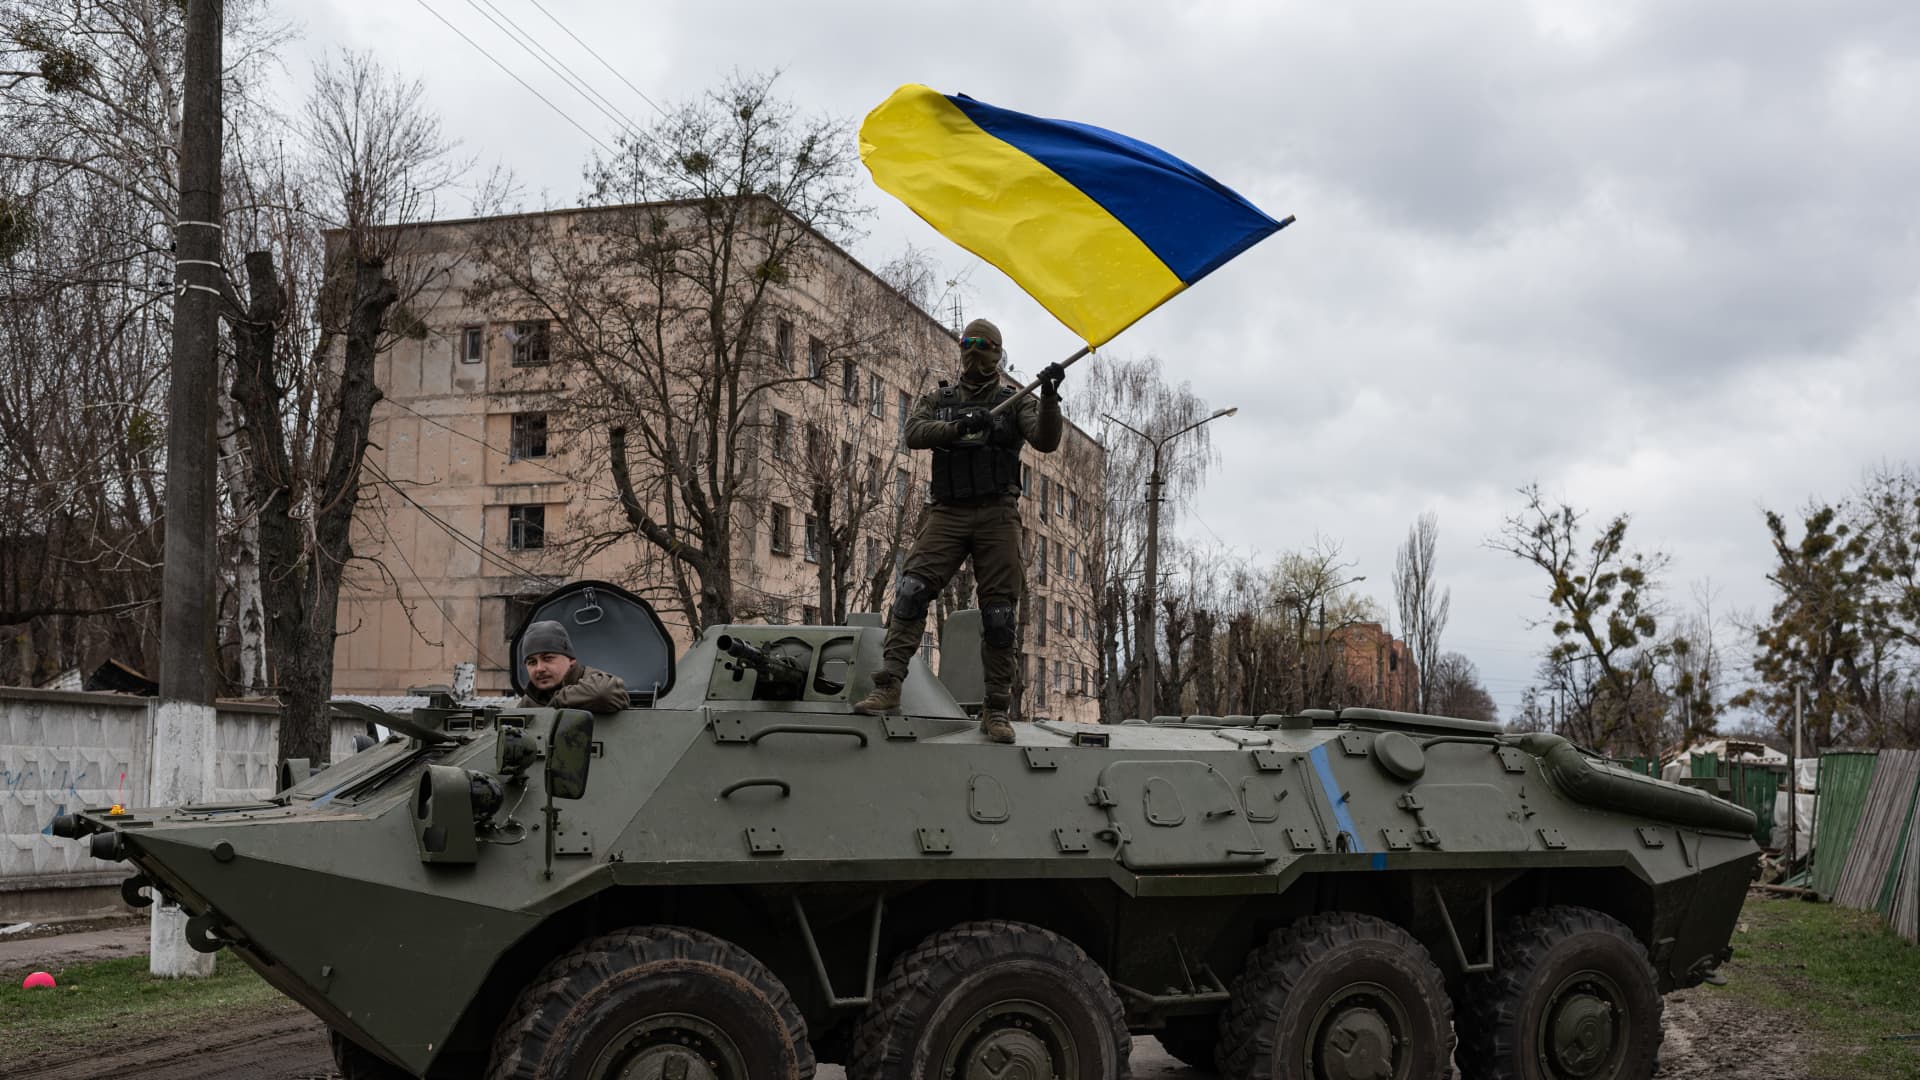 This is Ukraine’s ‘finest hour,’ UK says, as it boosts military aid; Russia seen..